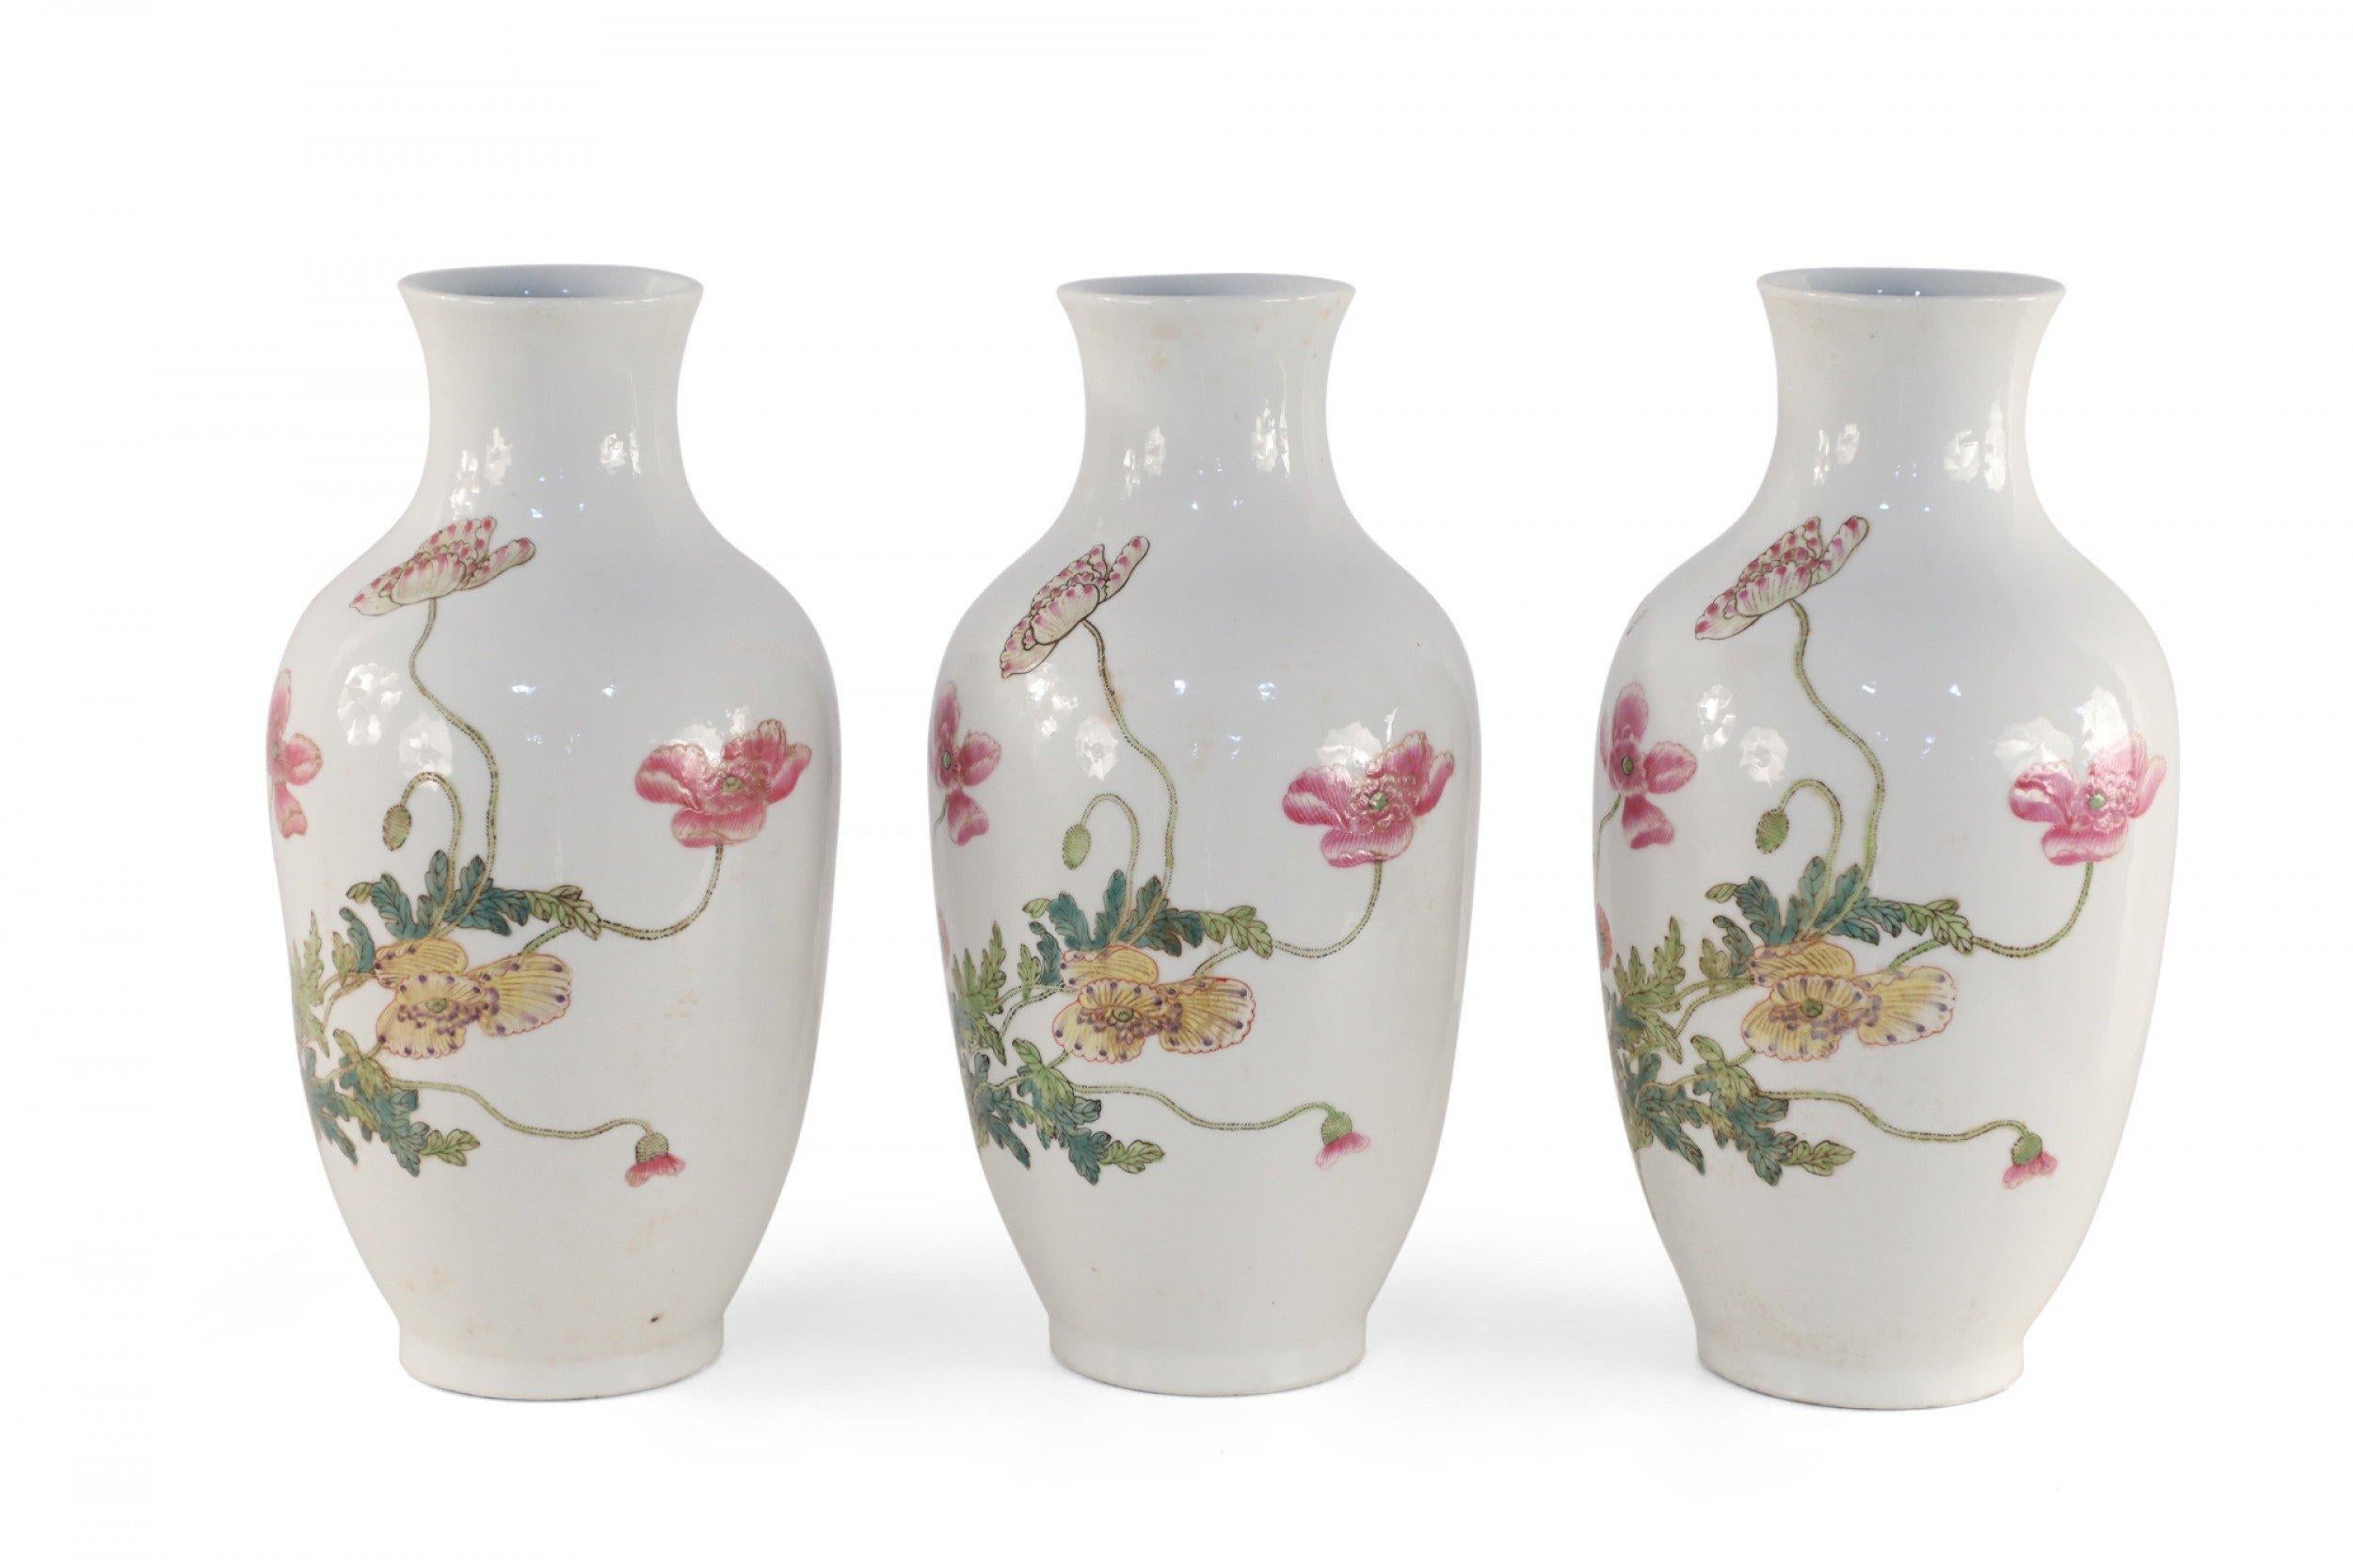 20th Century Chinese White Floral and Butterfly Patterned Porcelain Vases For Sale